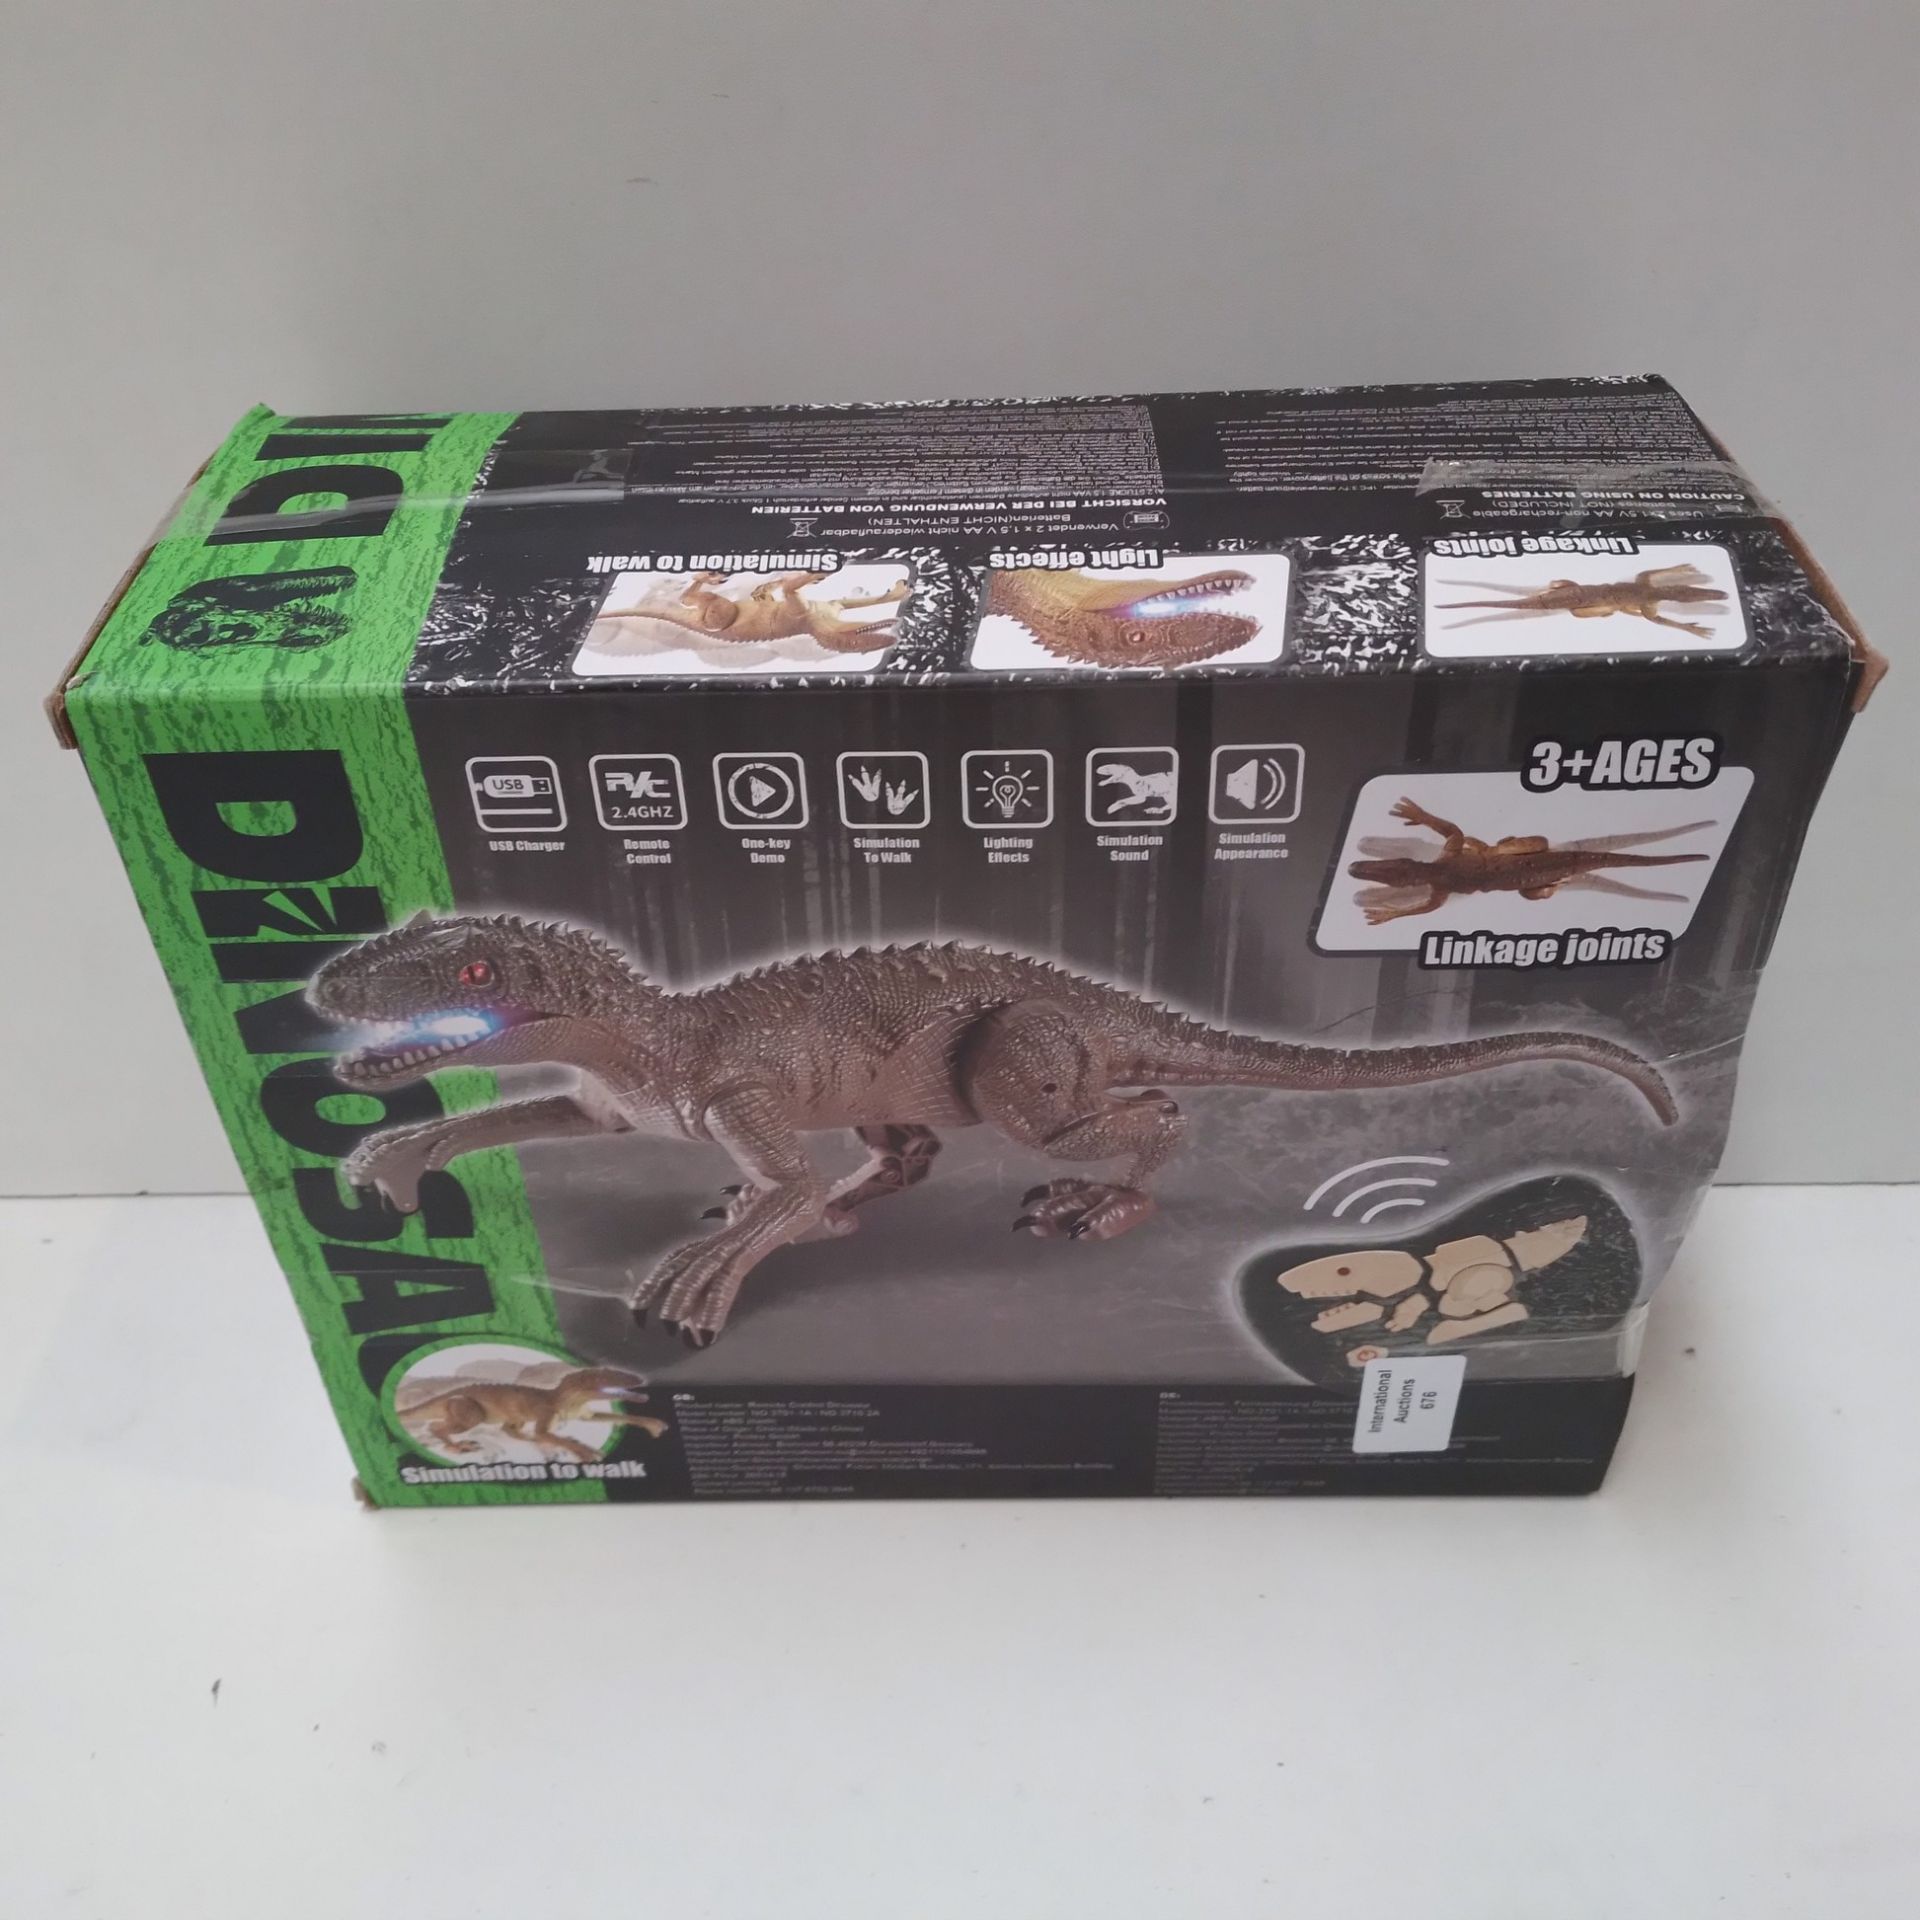 RRP £27.98 Kizmyee Remote Control Dinosaur Toys for Boys 2.4Ghz - Image 2 of 2